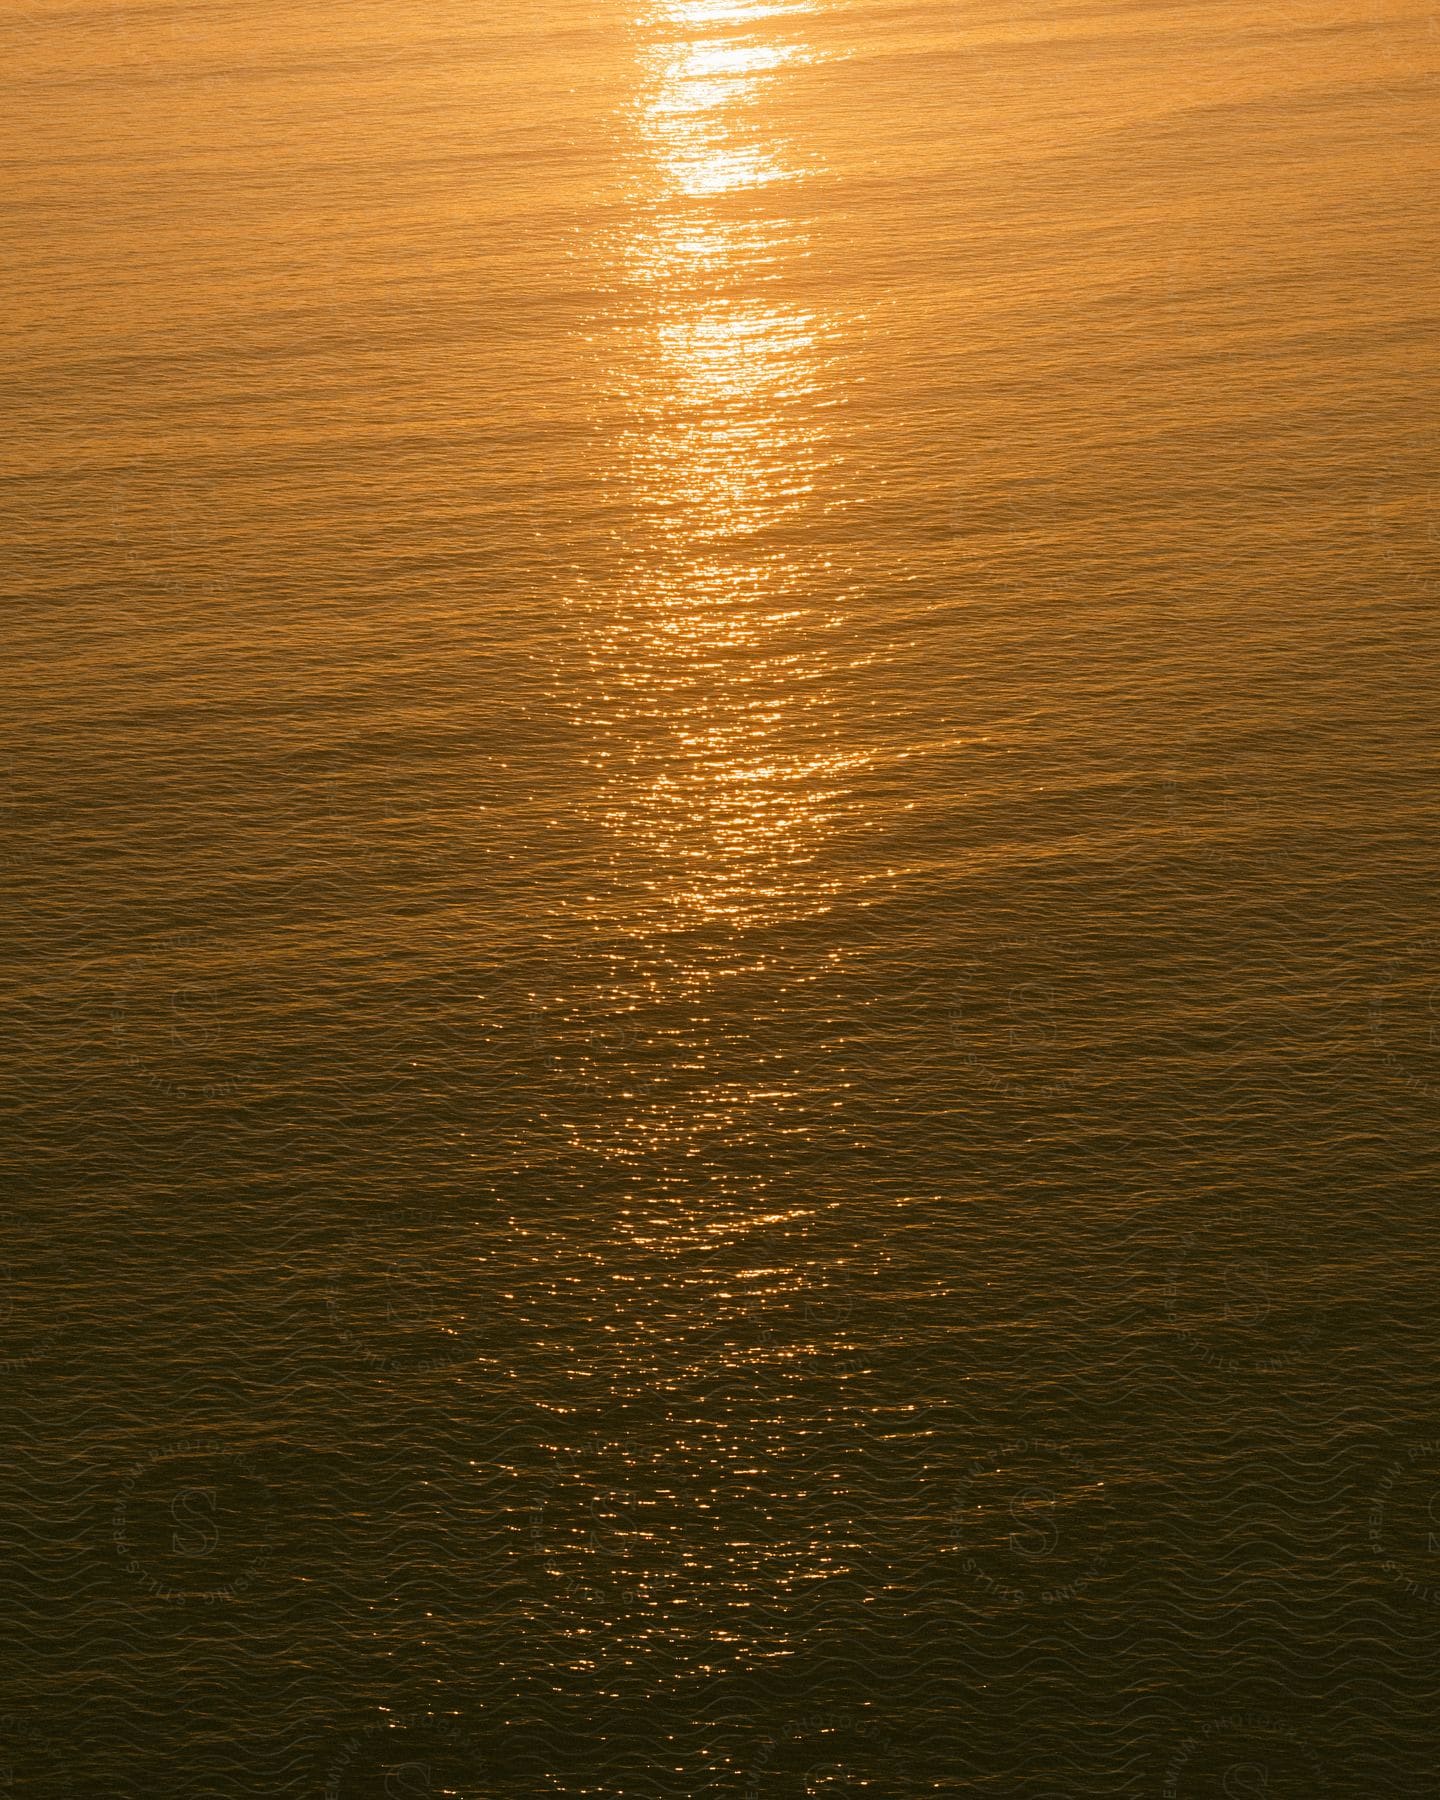 Sunlight hitting and reflecting on the sea water during sunset